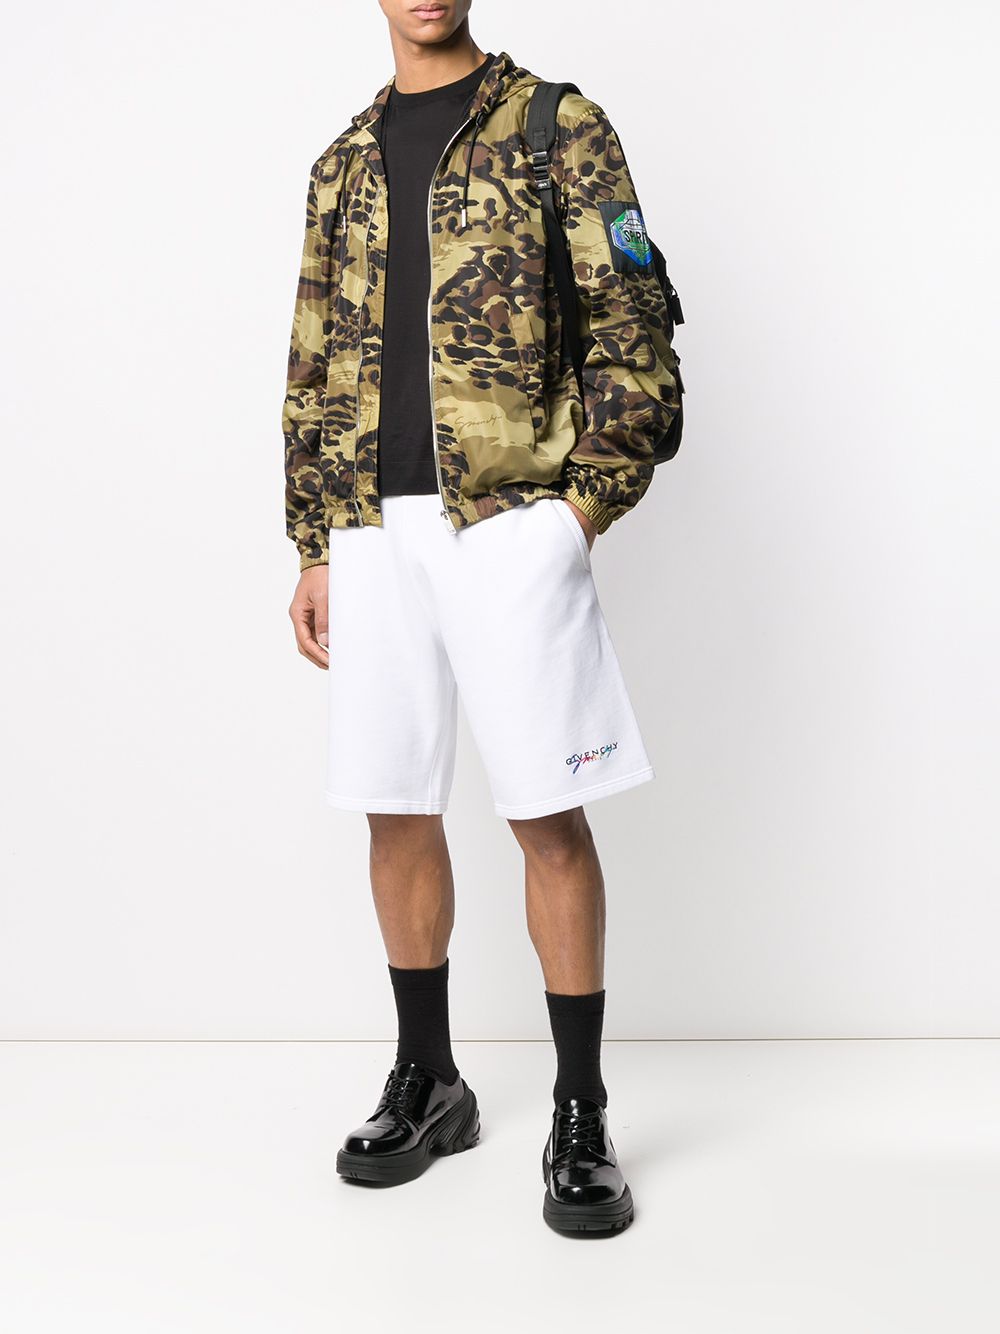 Givenchy Hooded Camouflage Jacket - Farfetch